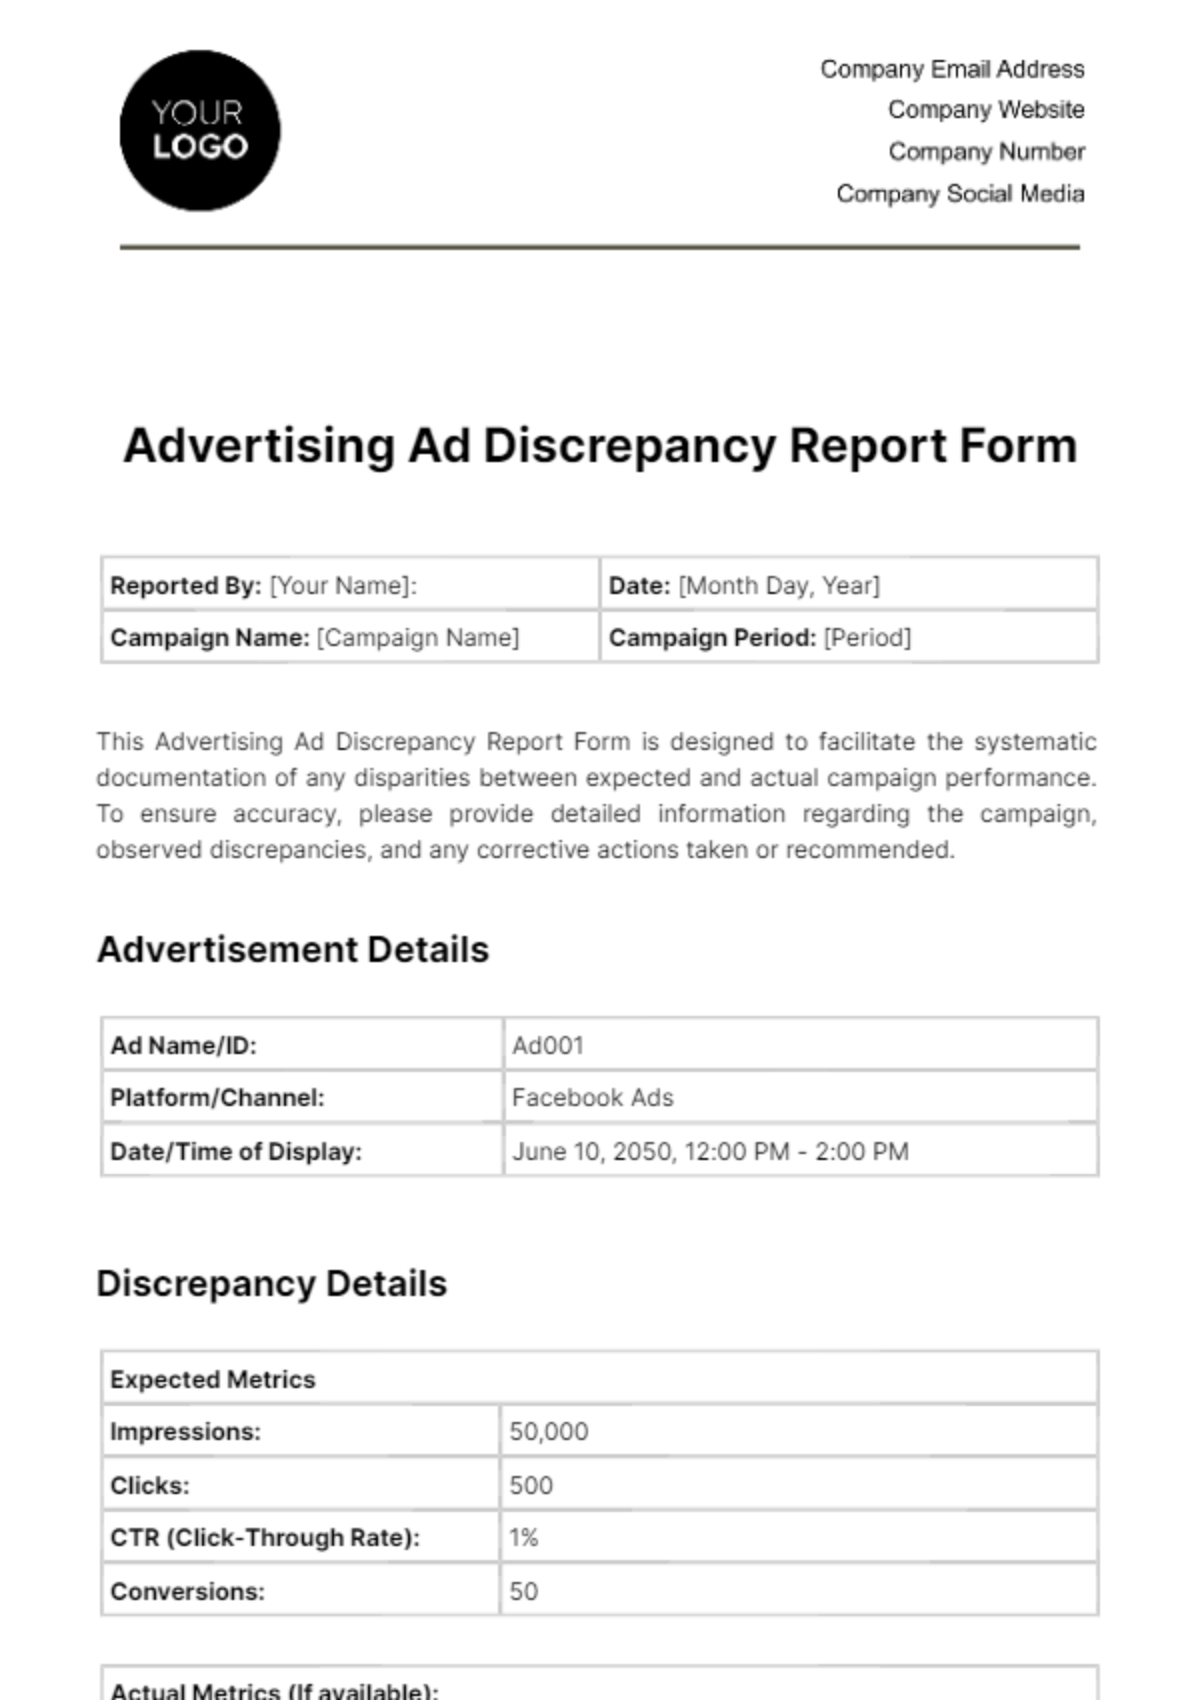 Advertising Ad Discrepancy Report Form Template